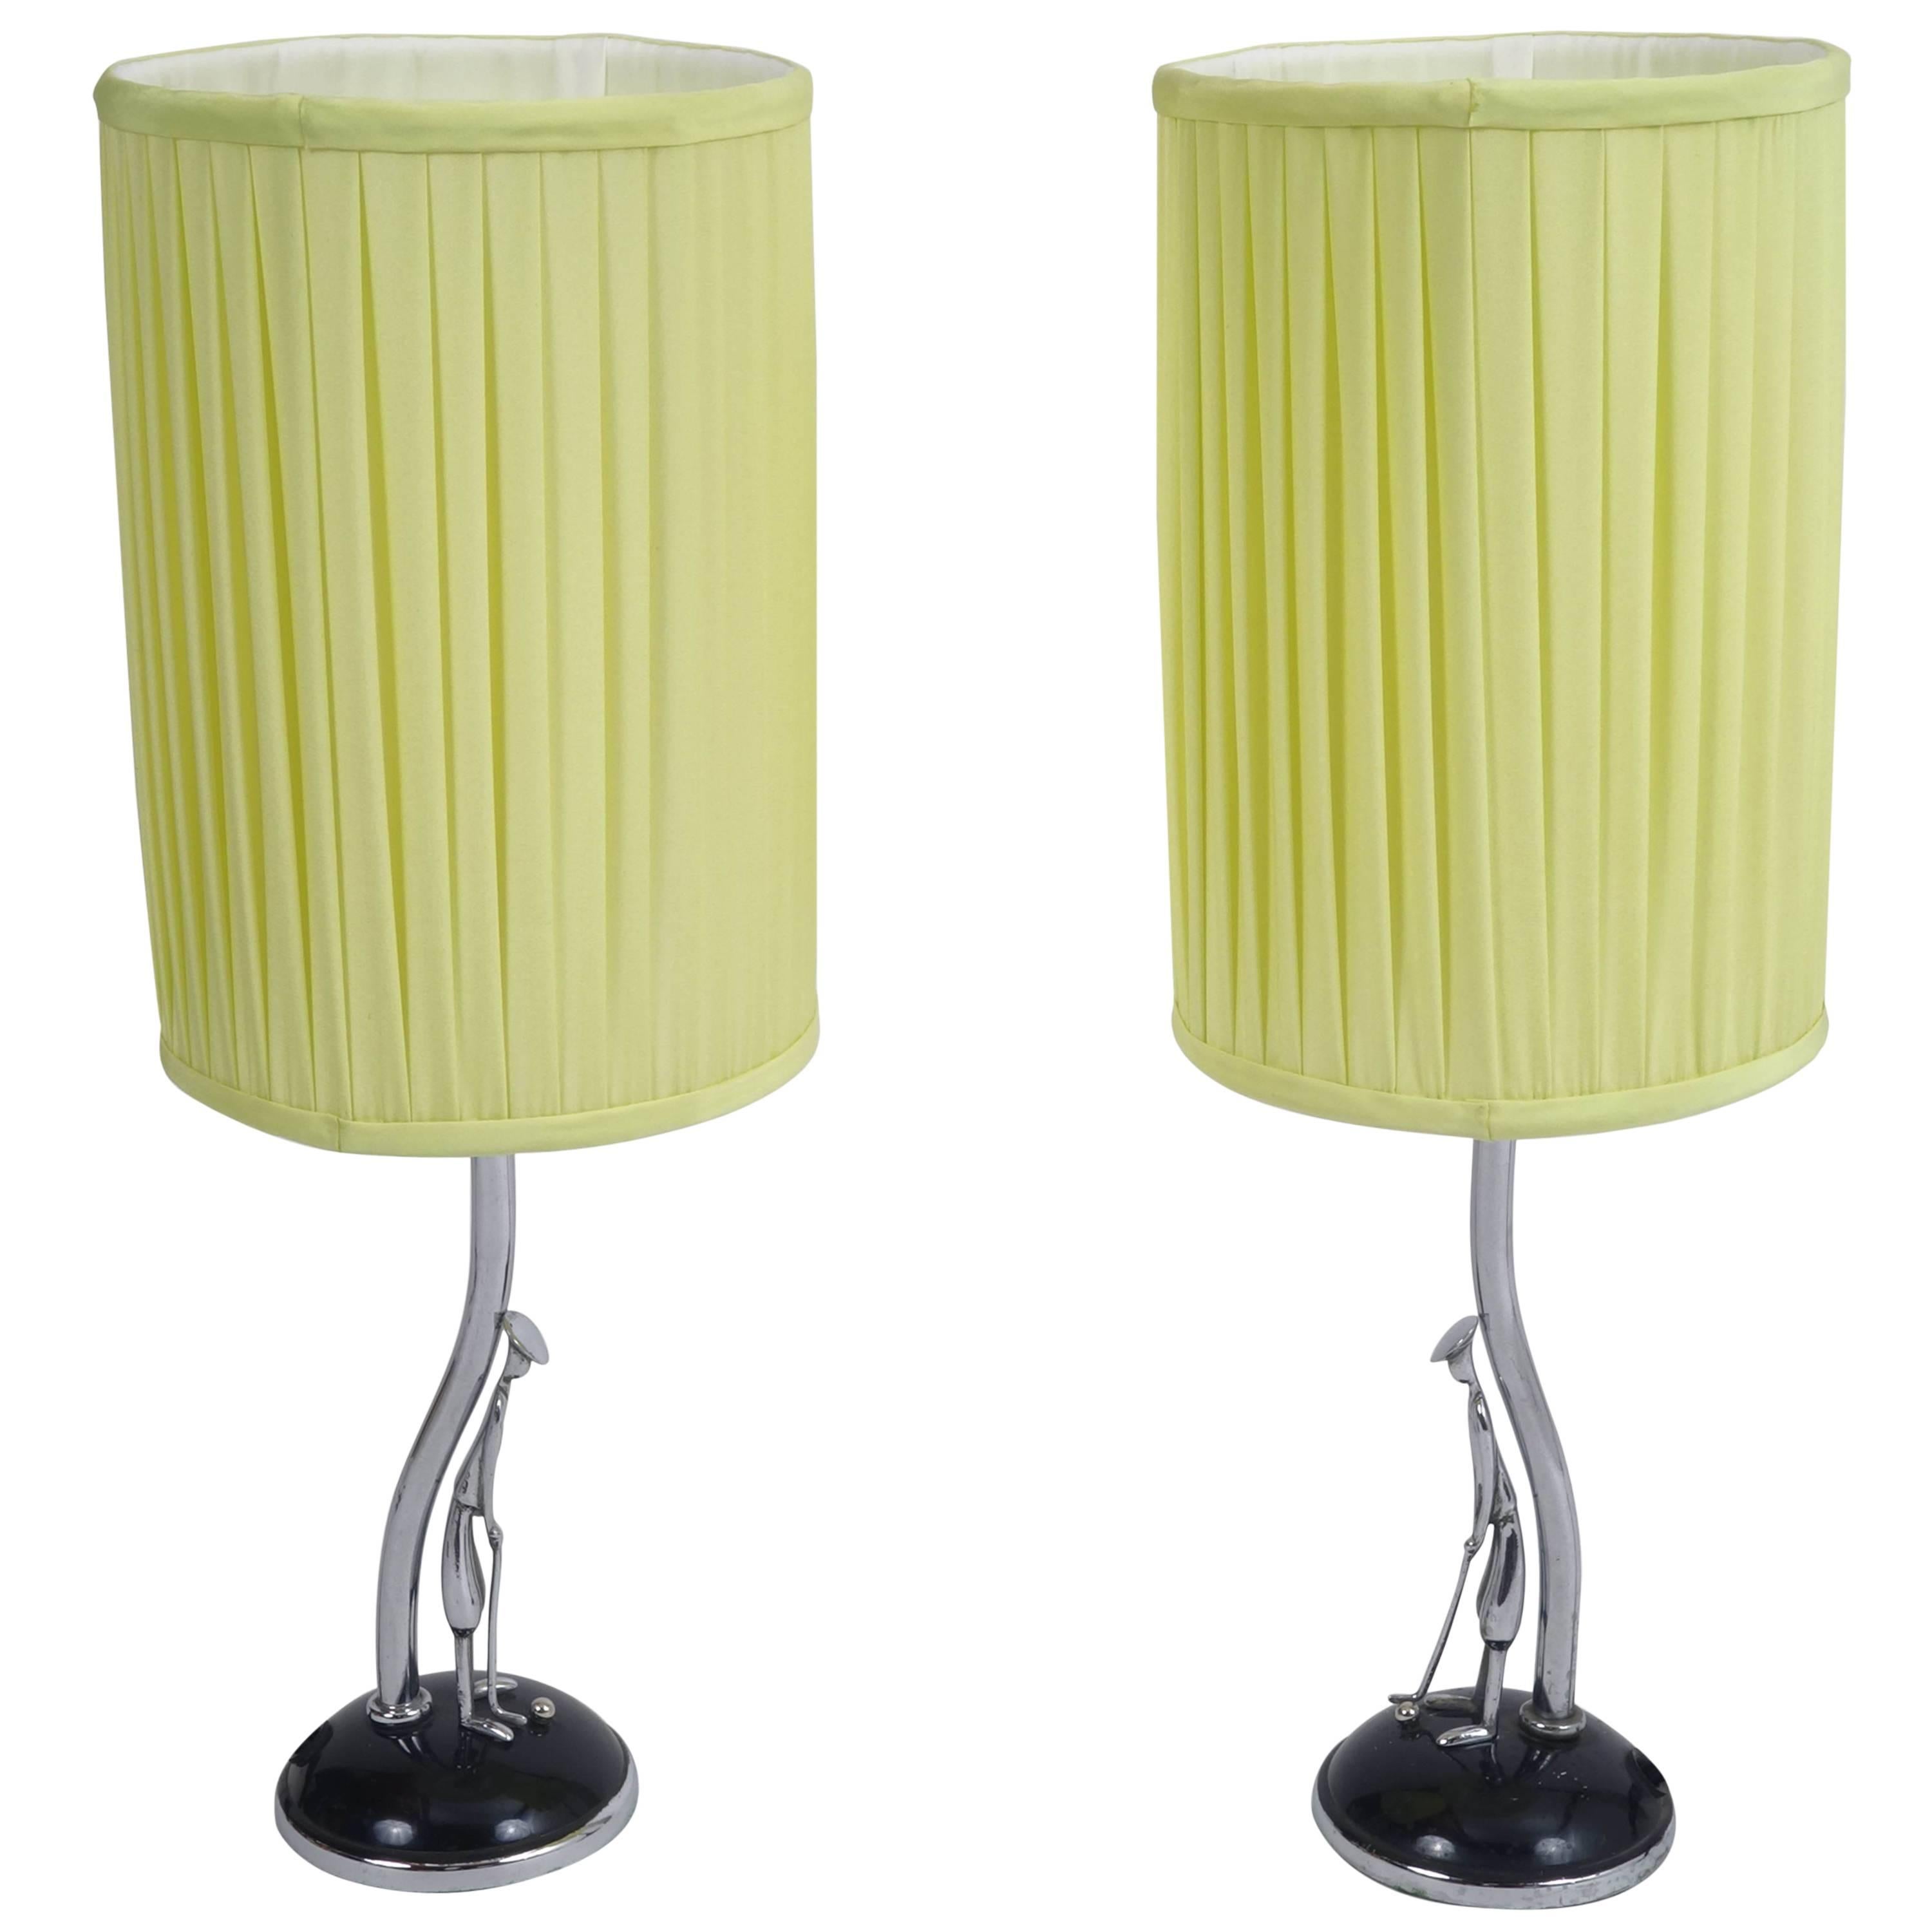 Hagenauer Table Lamps, Sculptured Nickel Stands with Yellow Lampshades For Sale